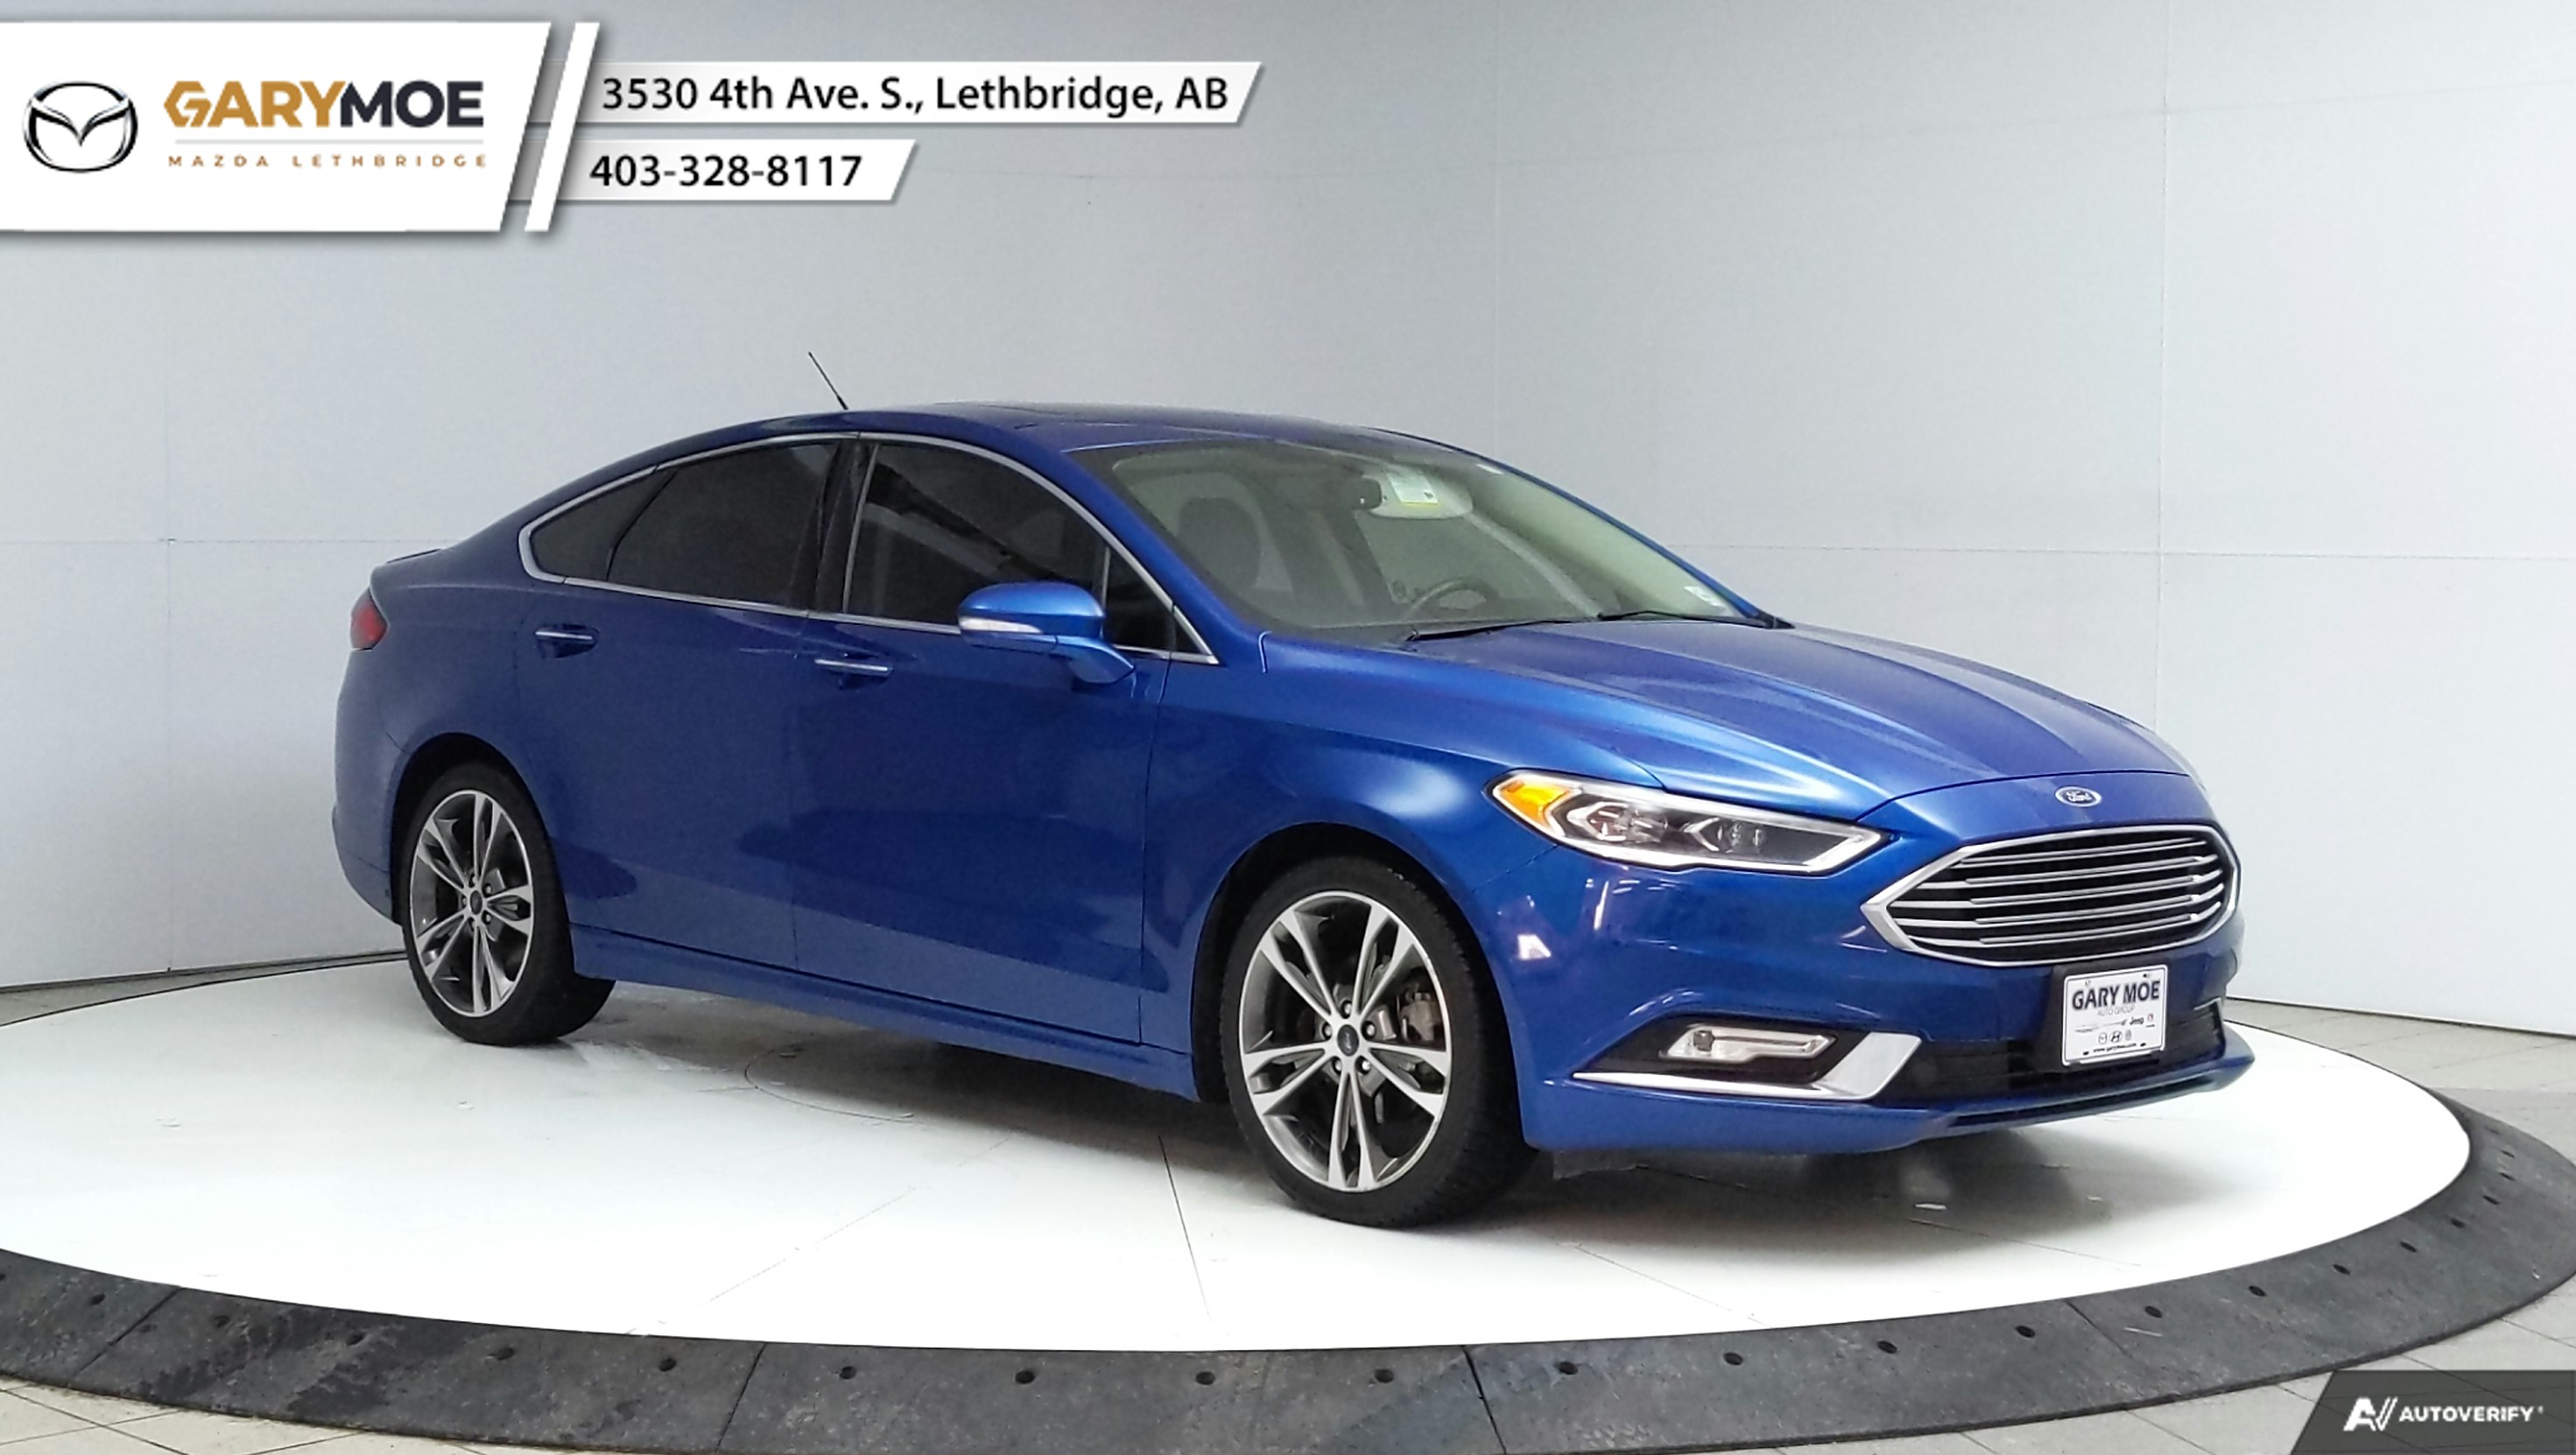 2017 Ford Fusion Platinum (Stk: ML1341A) in Lethbridge - Image 1 of 8